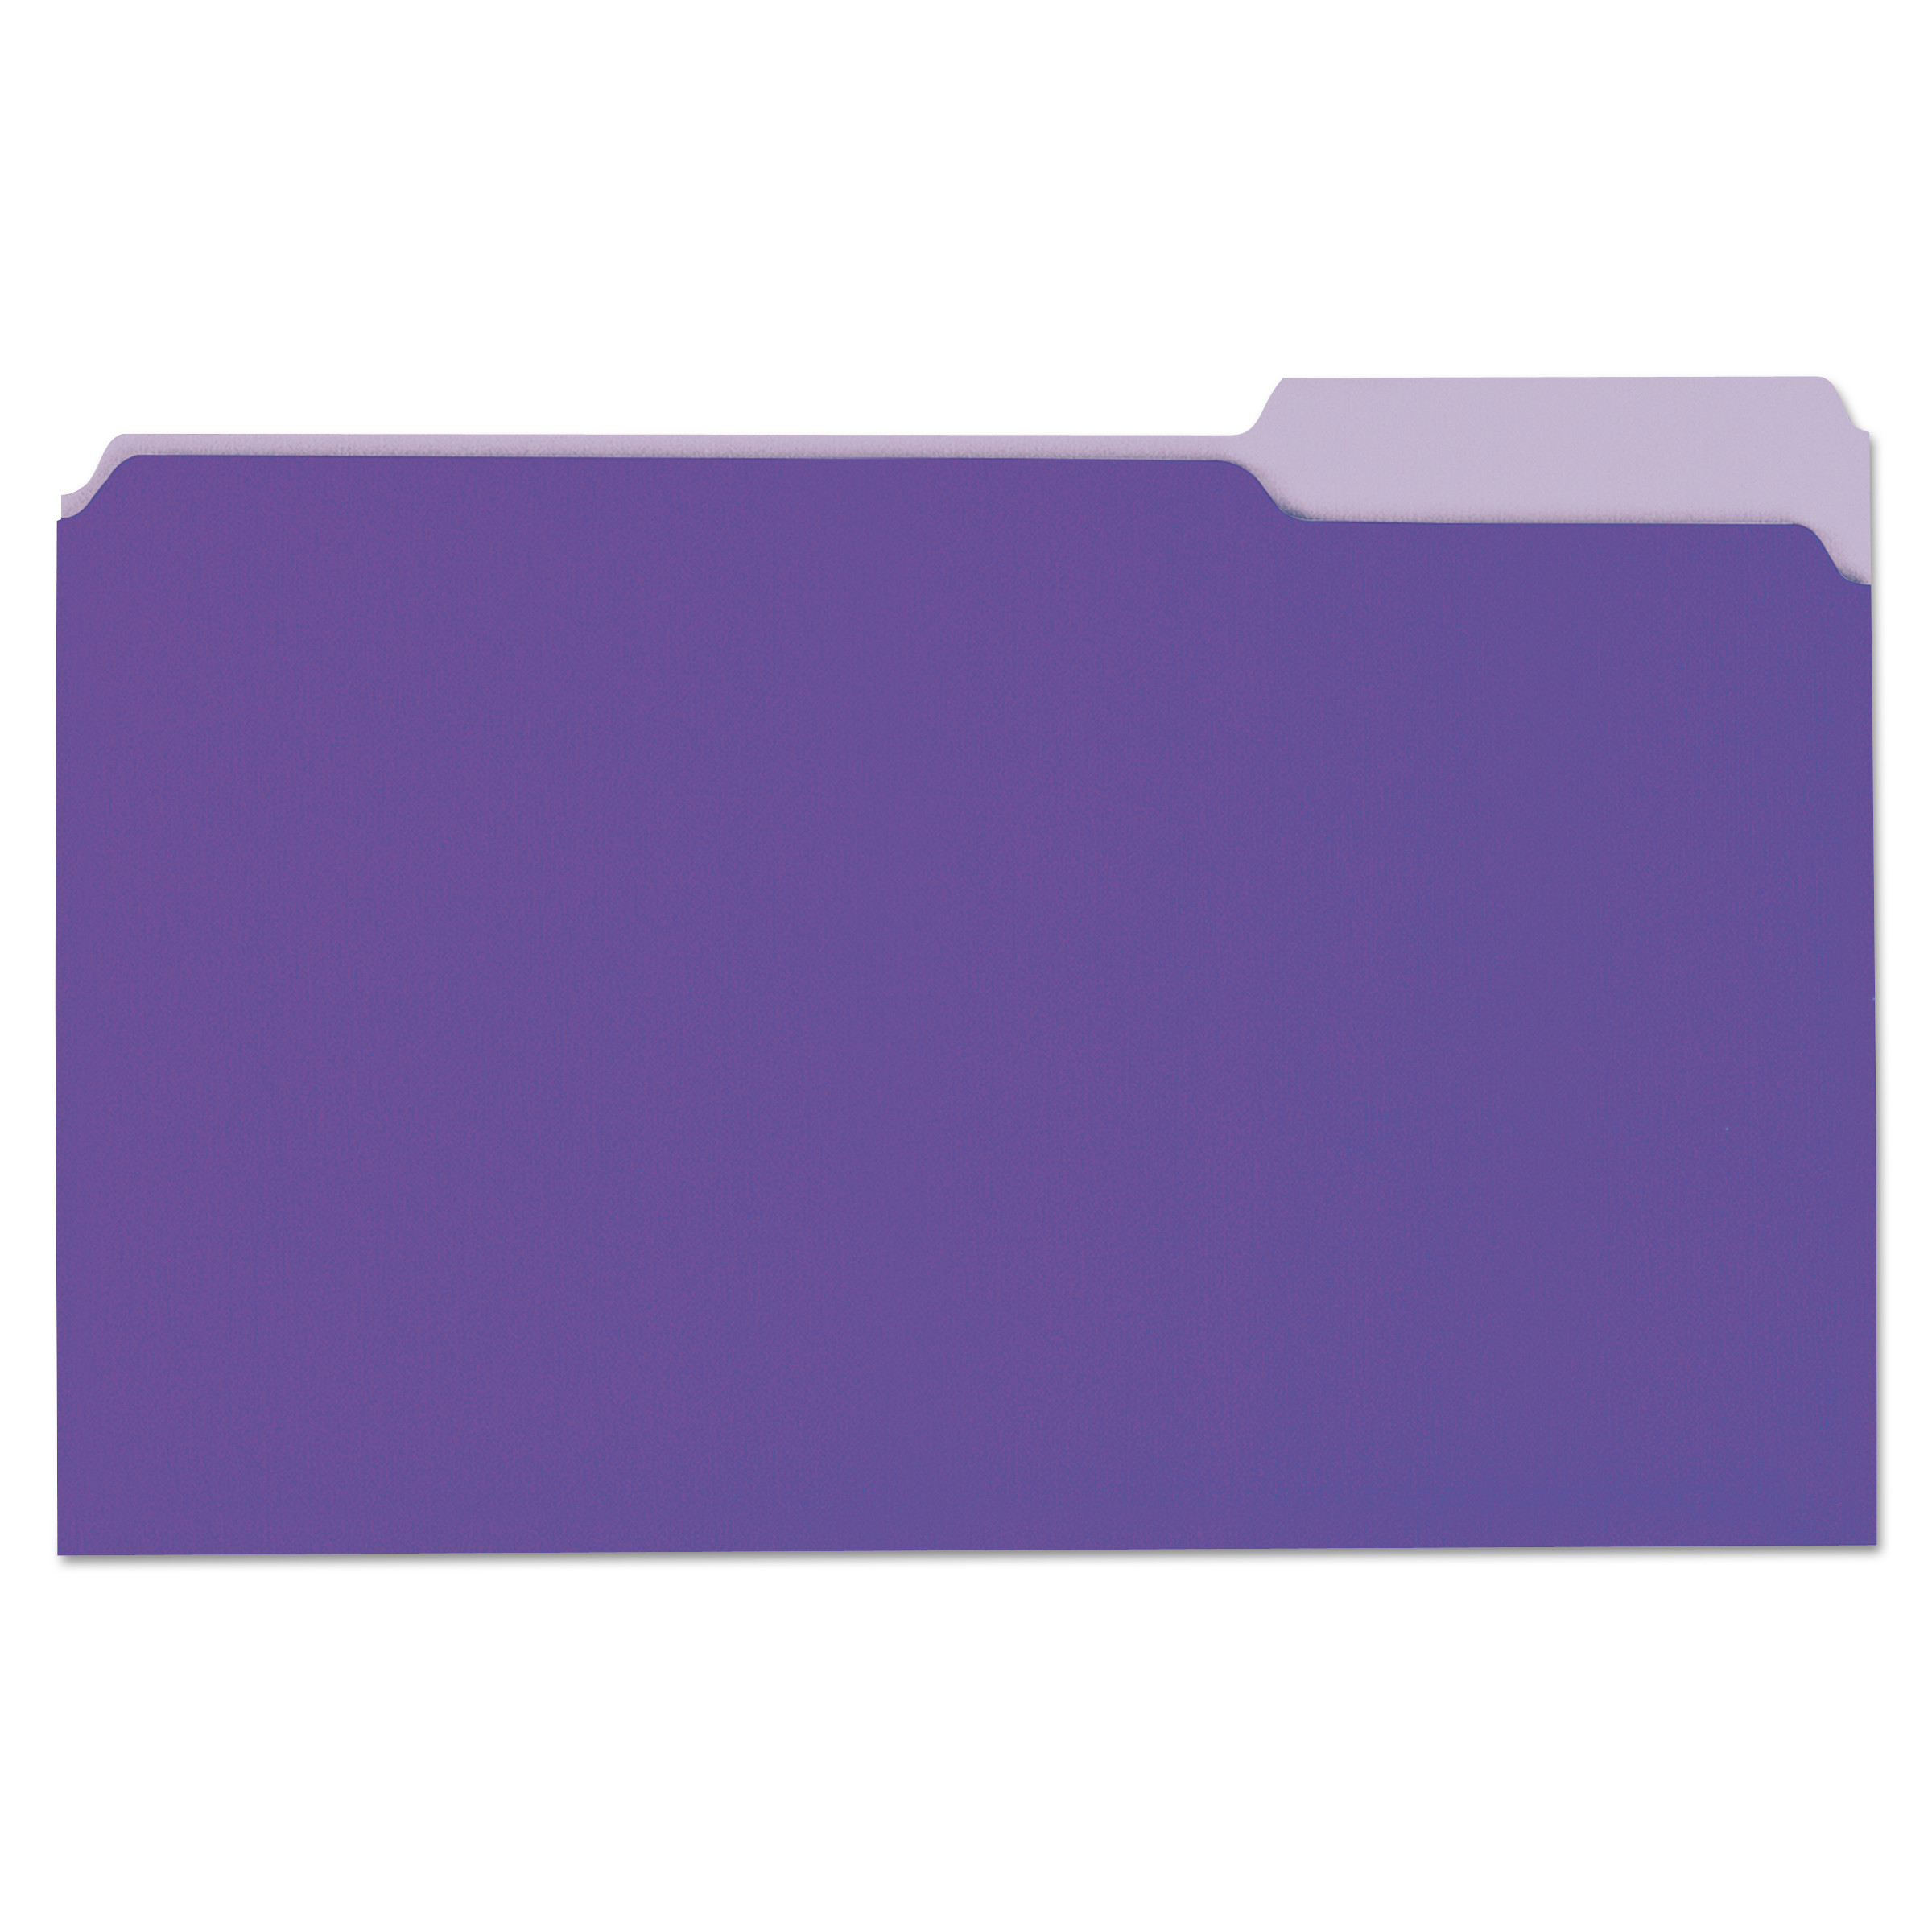  Universal UNV10525 Deluxe Colored Top Tab File Folders, 1/3-Cut Tabs, Legal Size, Violet/Light Violet, 100/Box (UNV10525) 